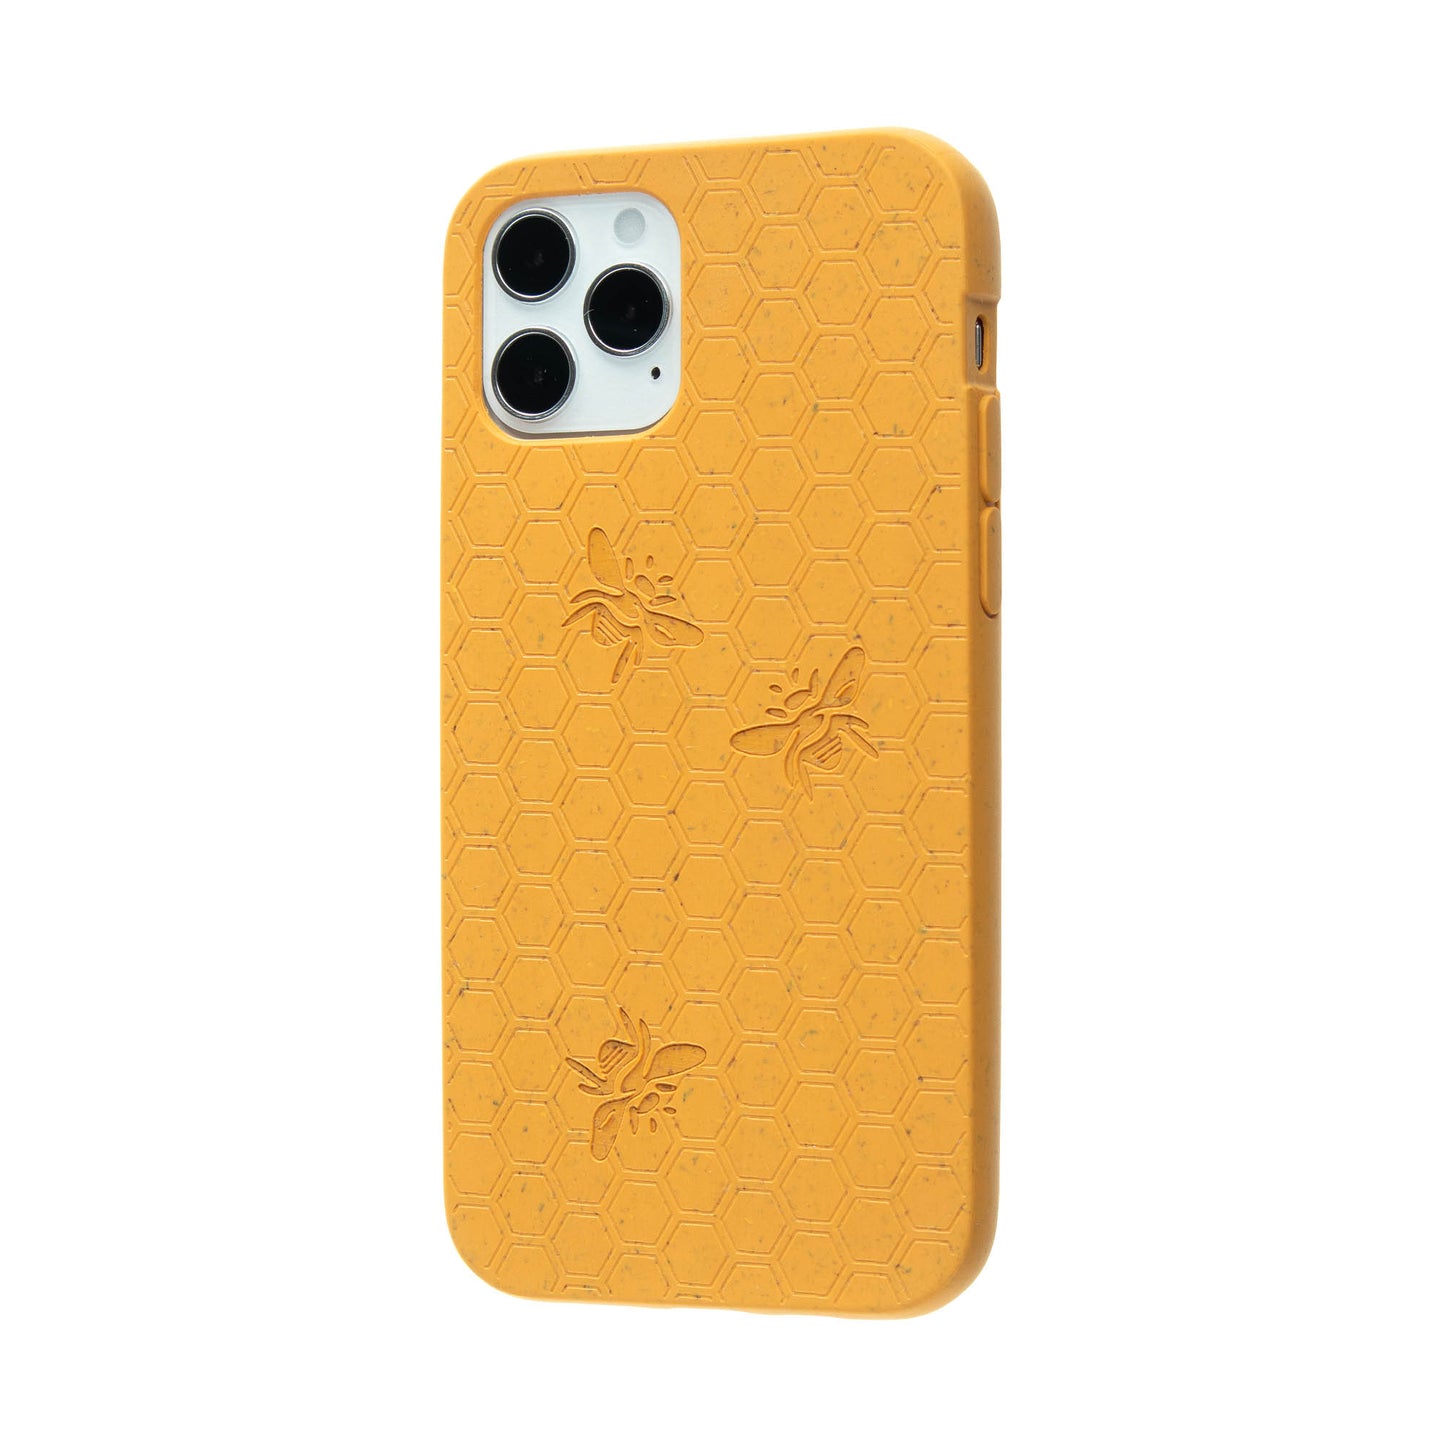 Right sideview of honey bee, honeycomb engraved Pela phone case for the iPhone 12.